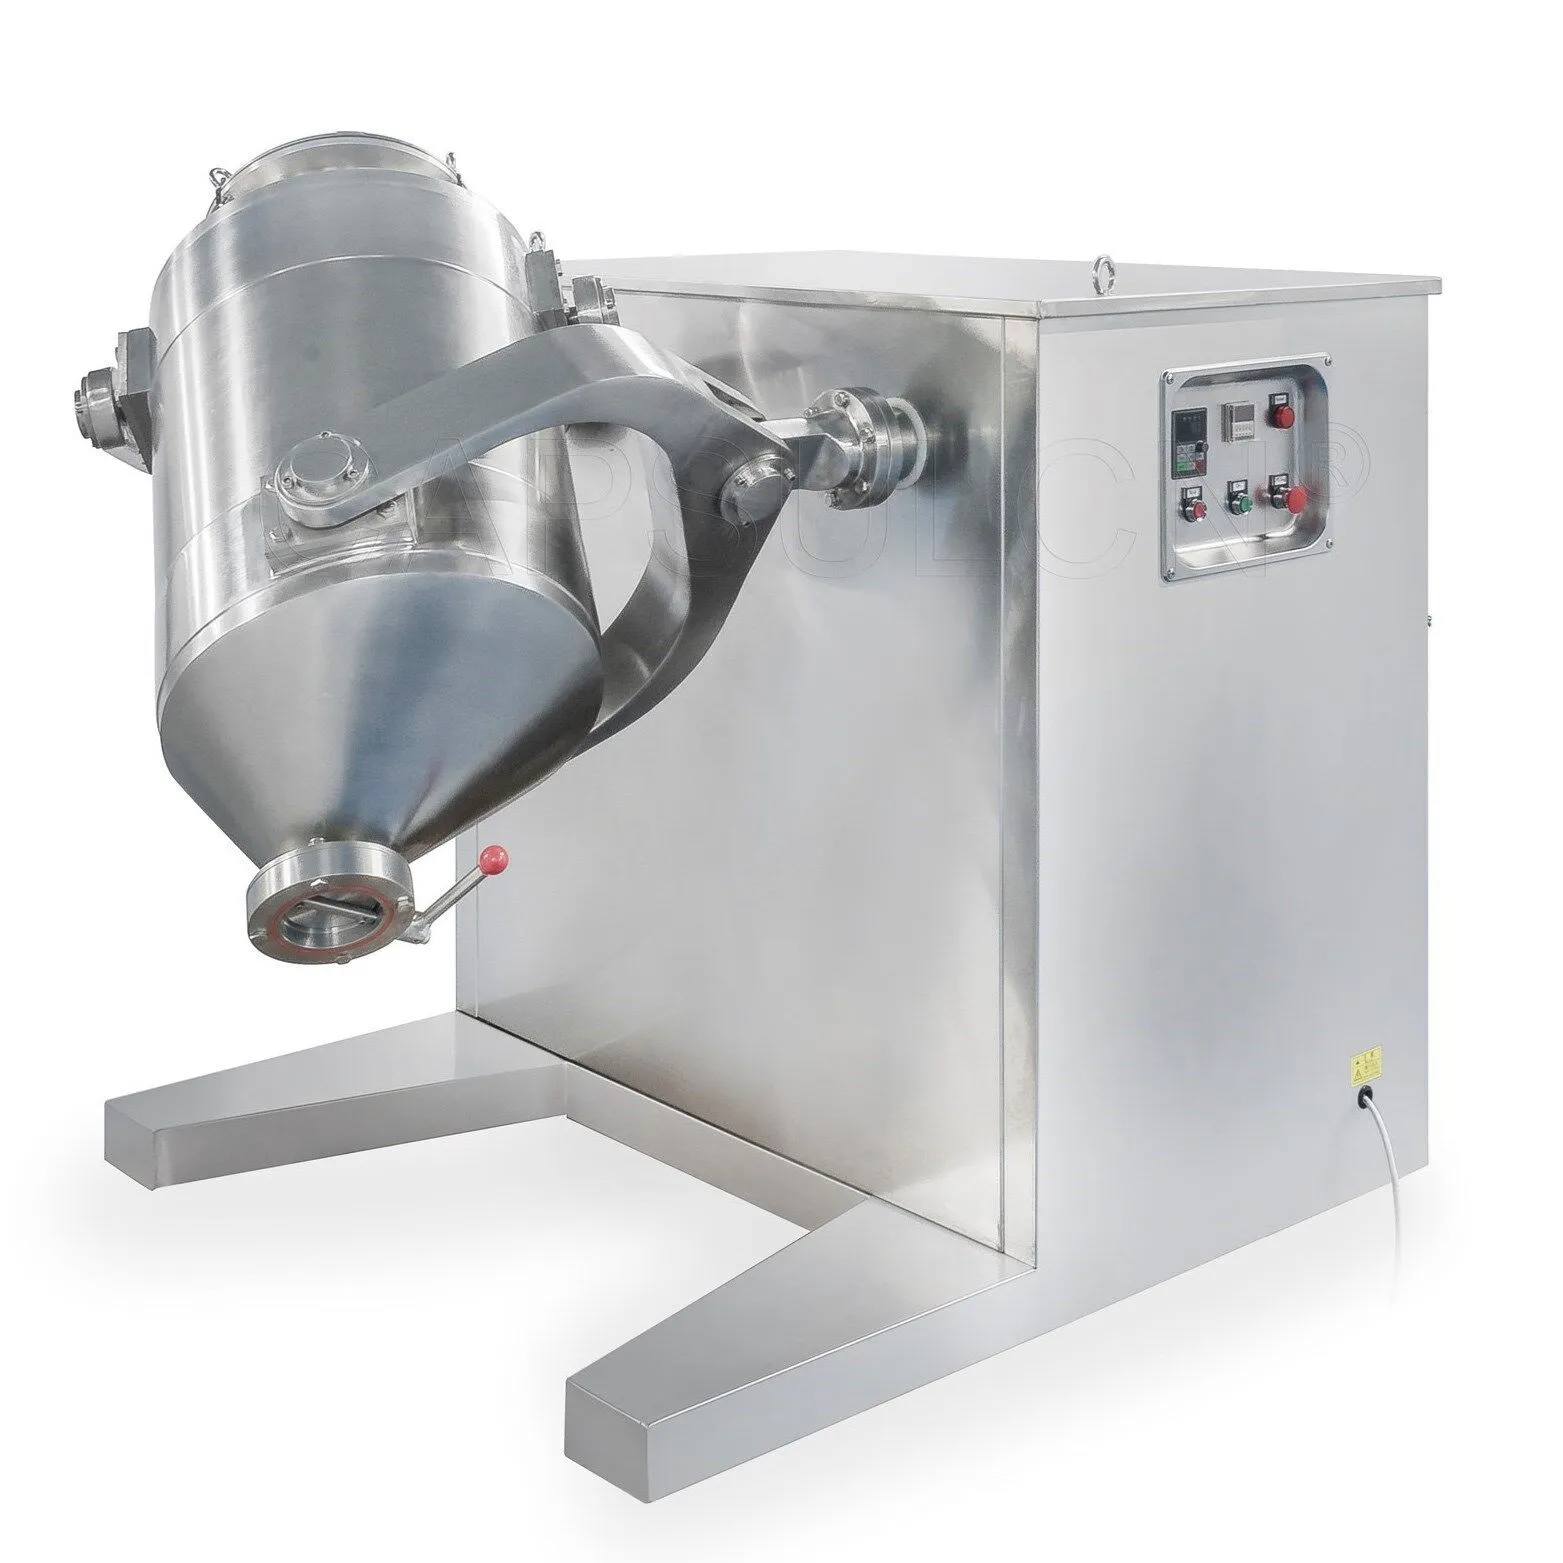 Essential Features to Look for When Choosing an Industrial Mixer for Food Blending